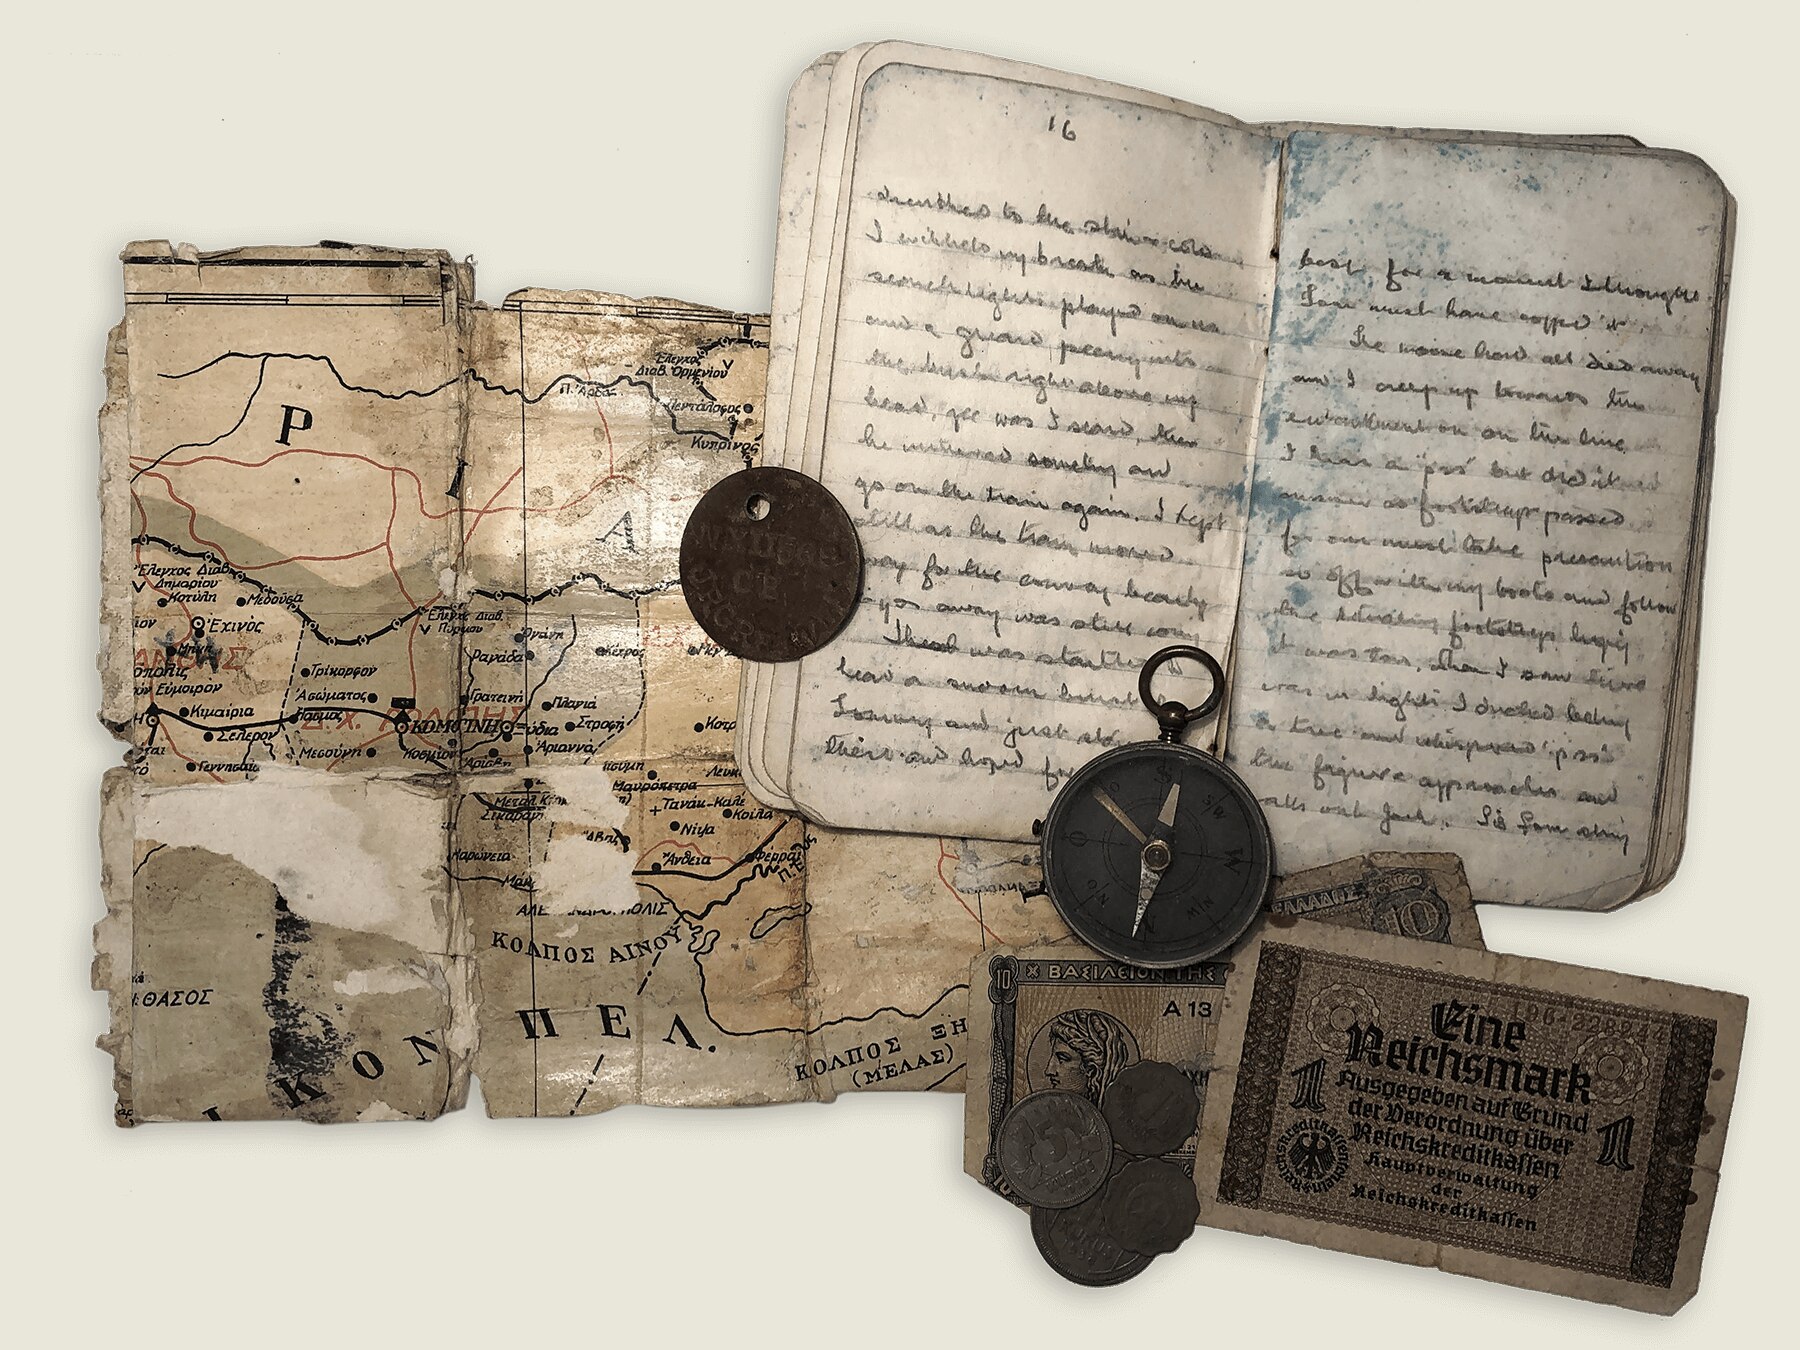 Jack's escape map, compass, diary, ID tag